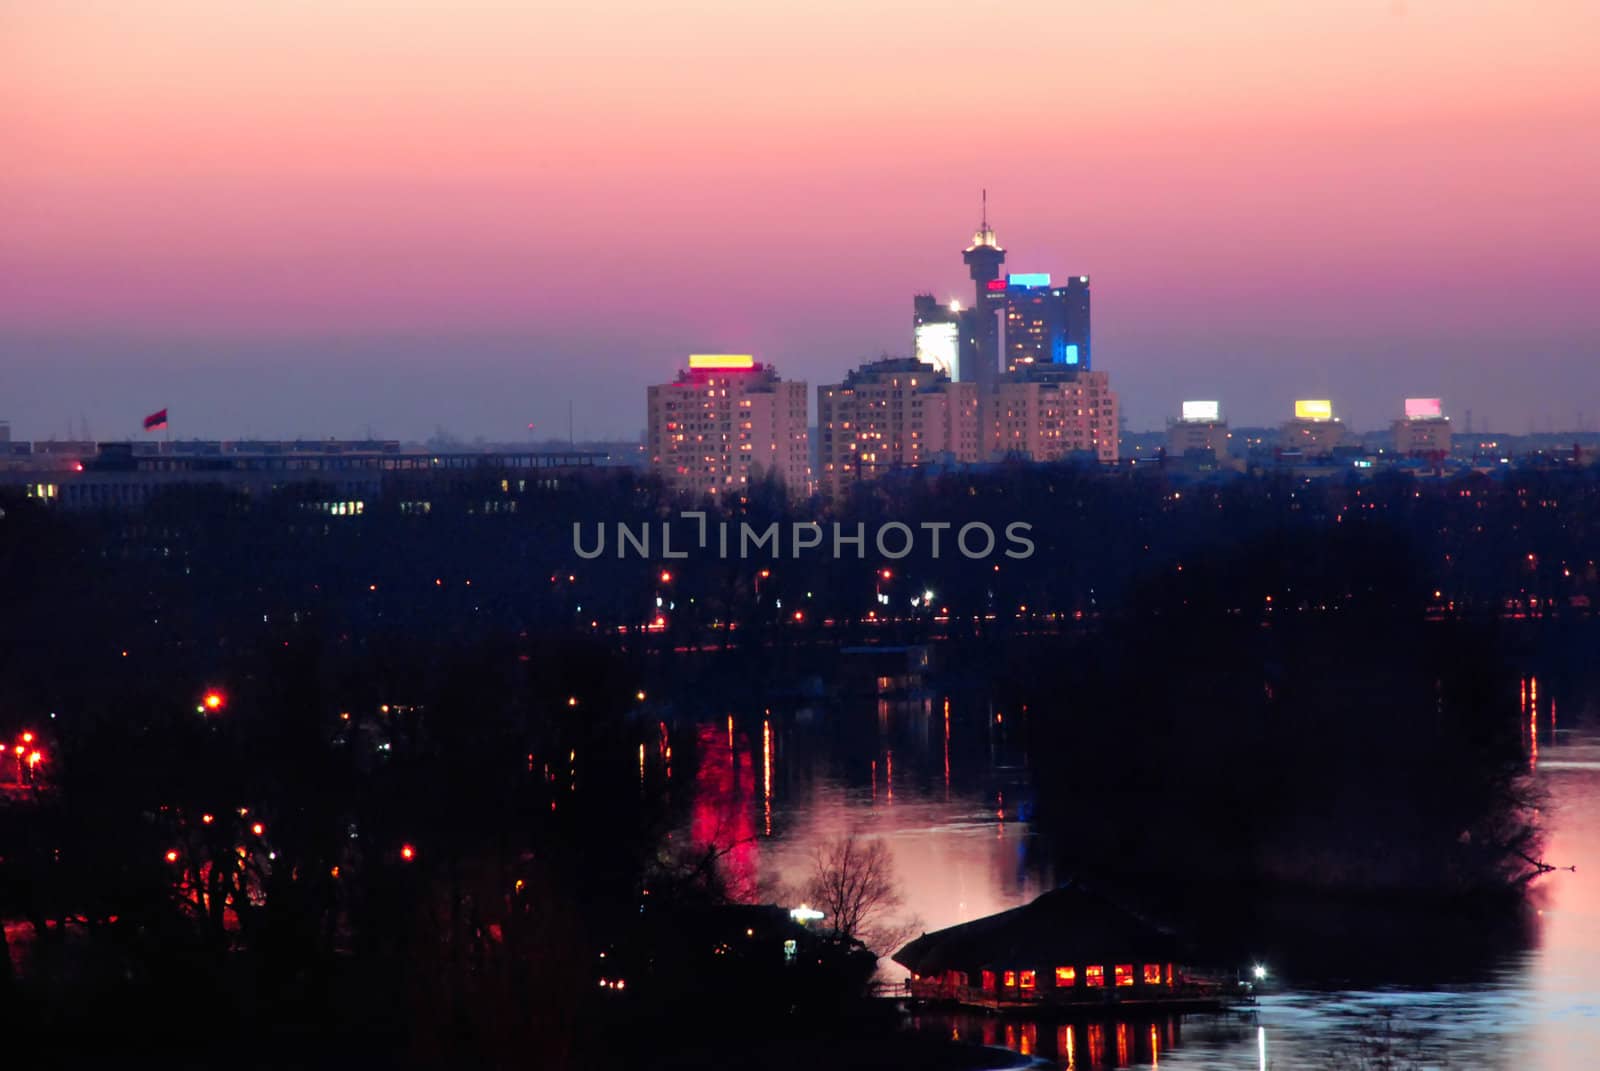 Belgrade evening view by simply